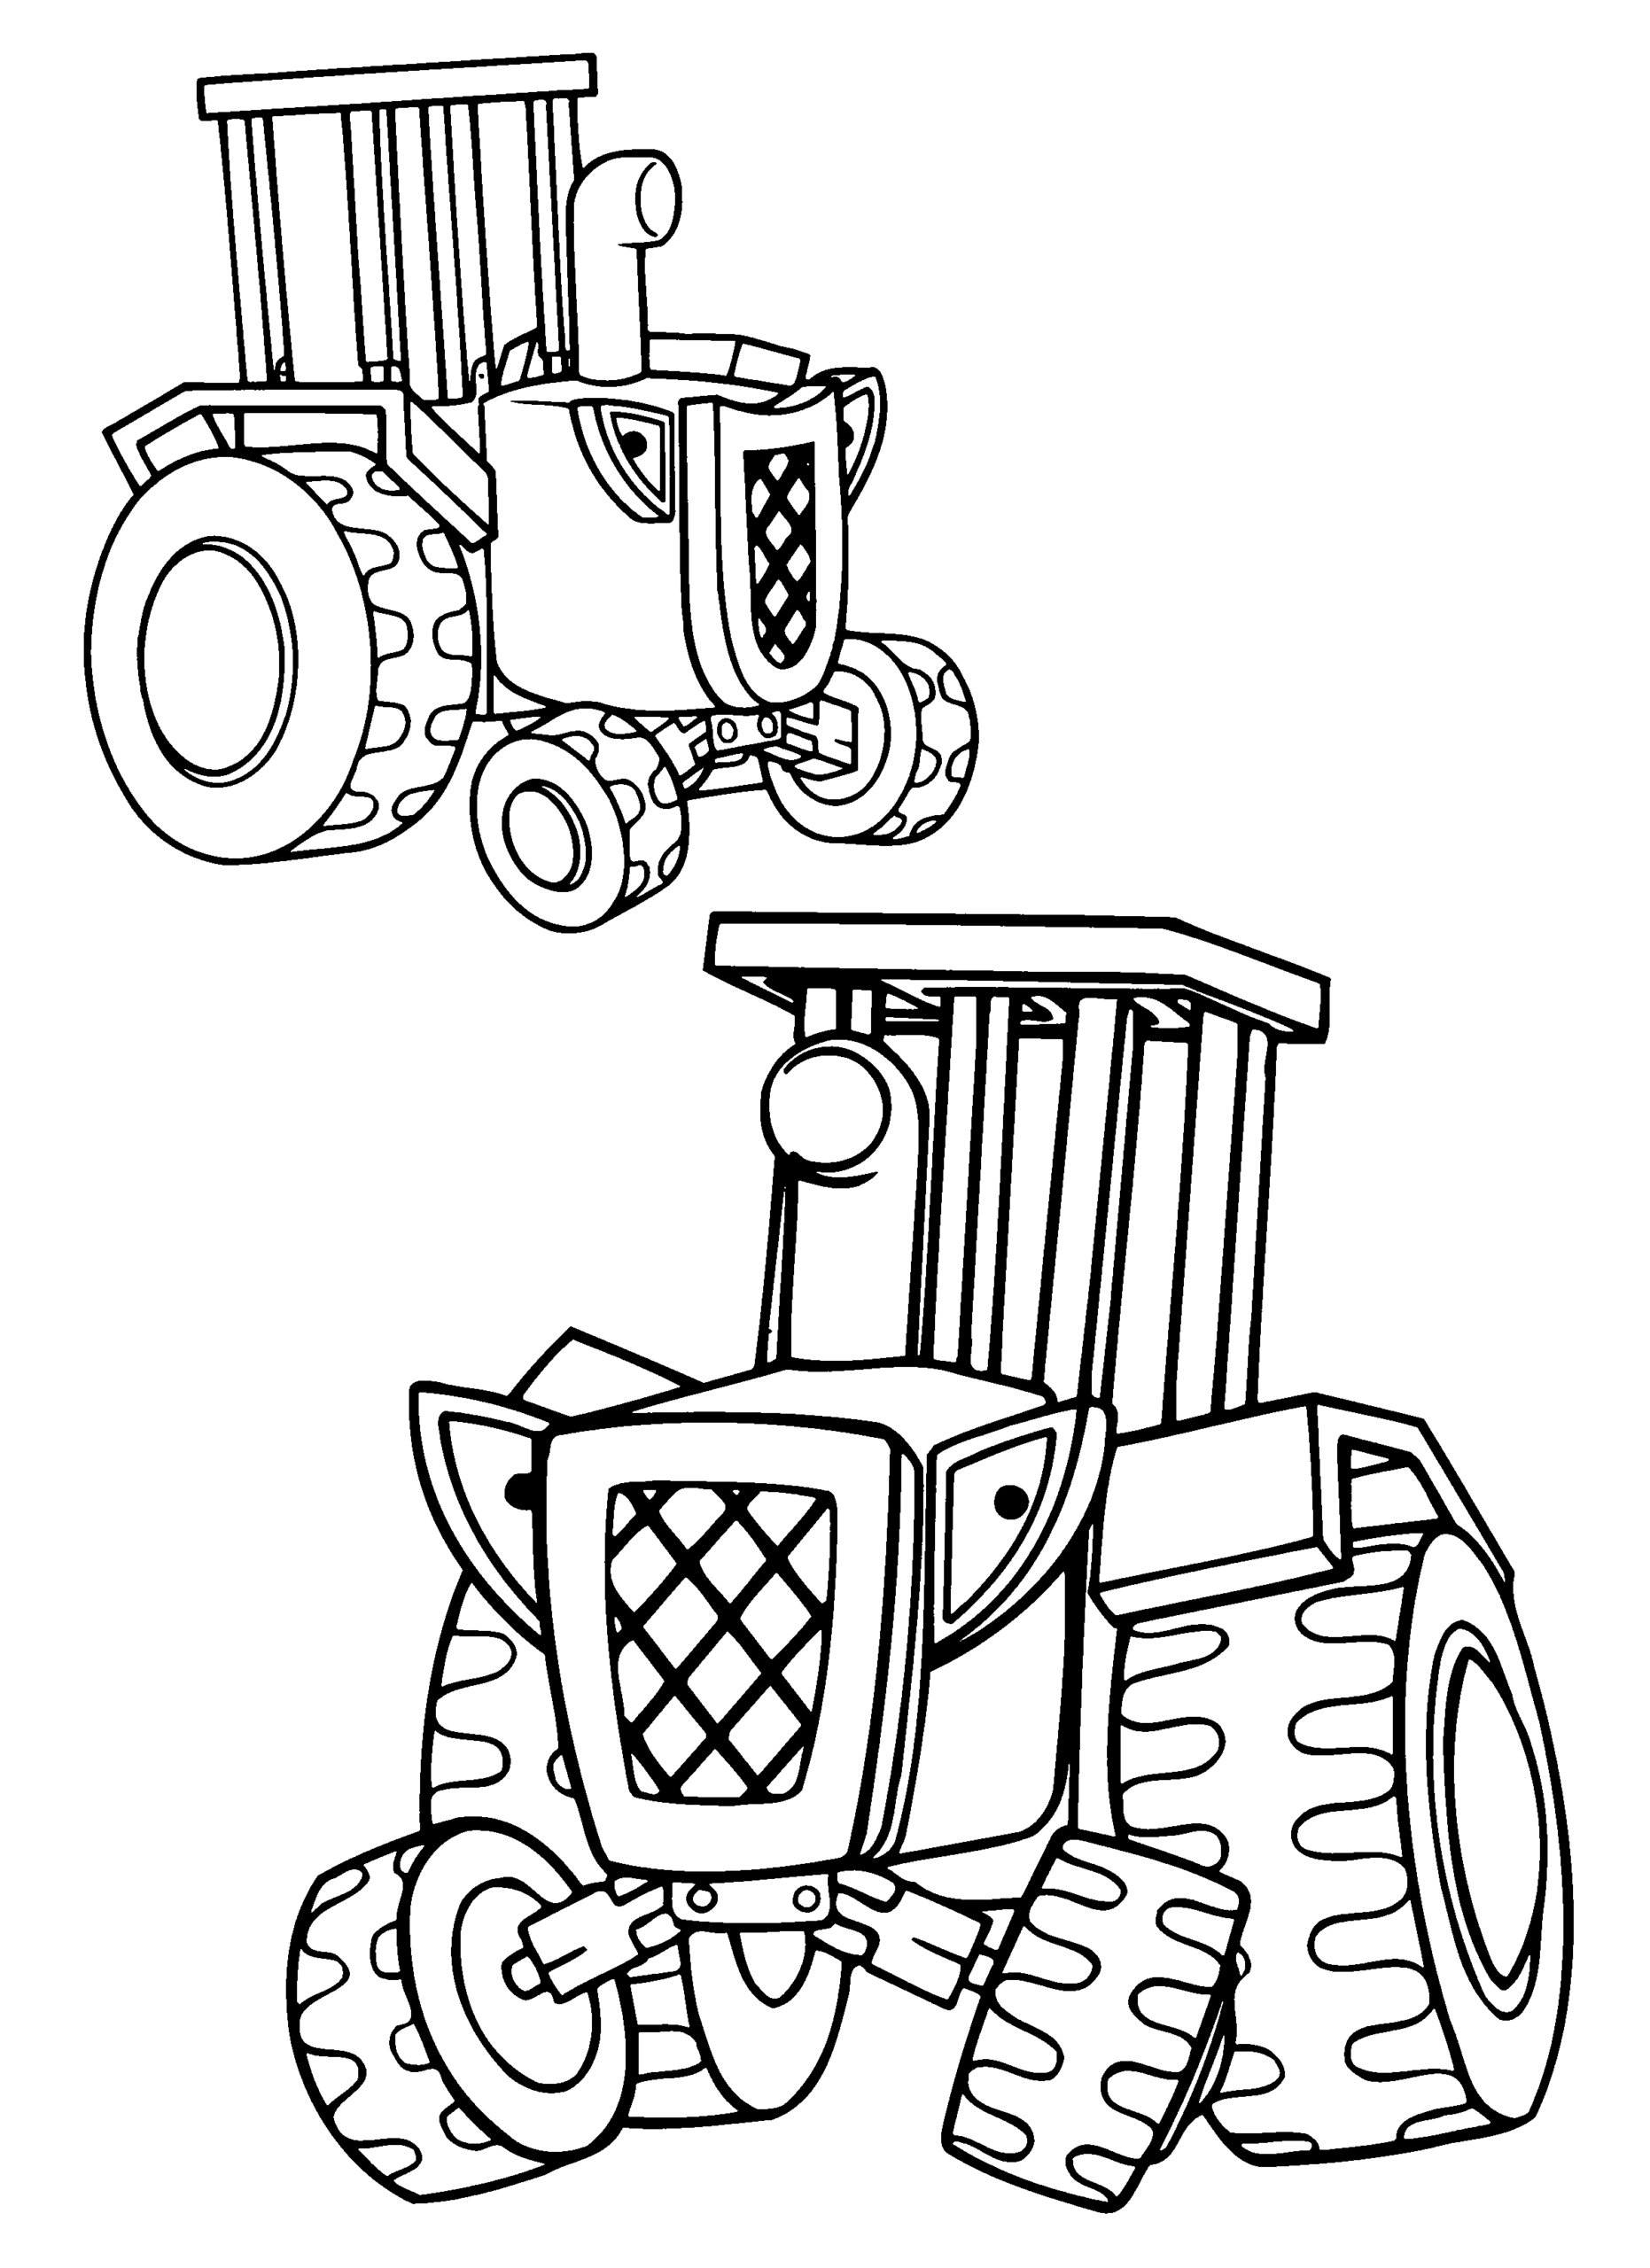 Bob the Builder Coloring Pages TV Film bob the builder 76 Printable 2020 01097 Coloring4free